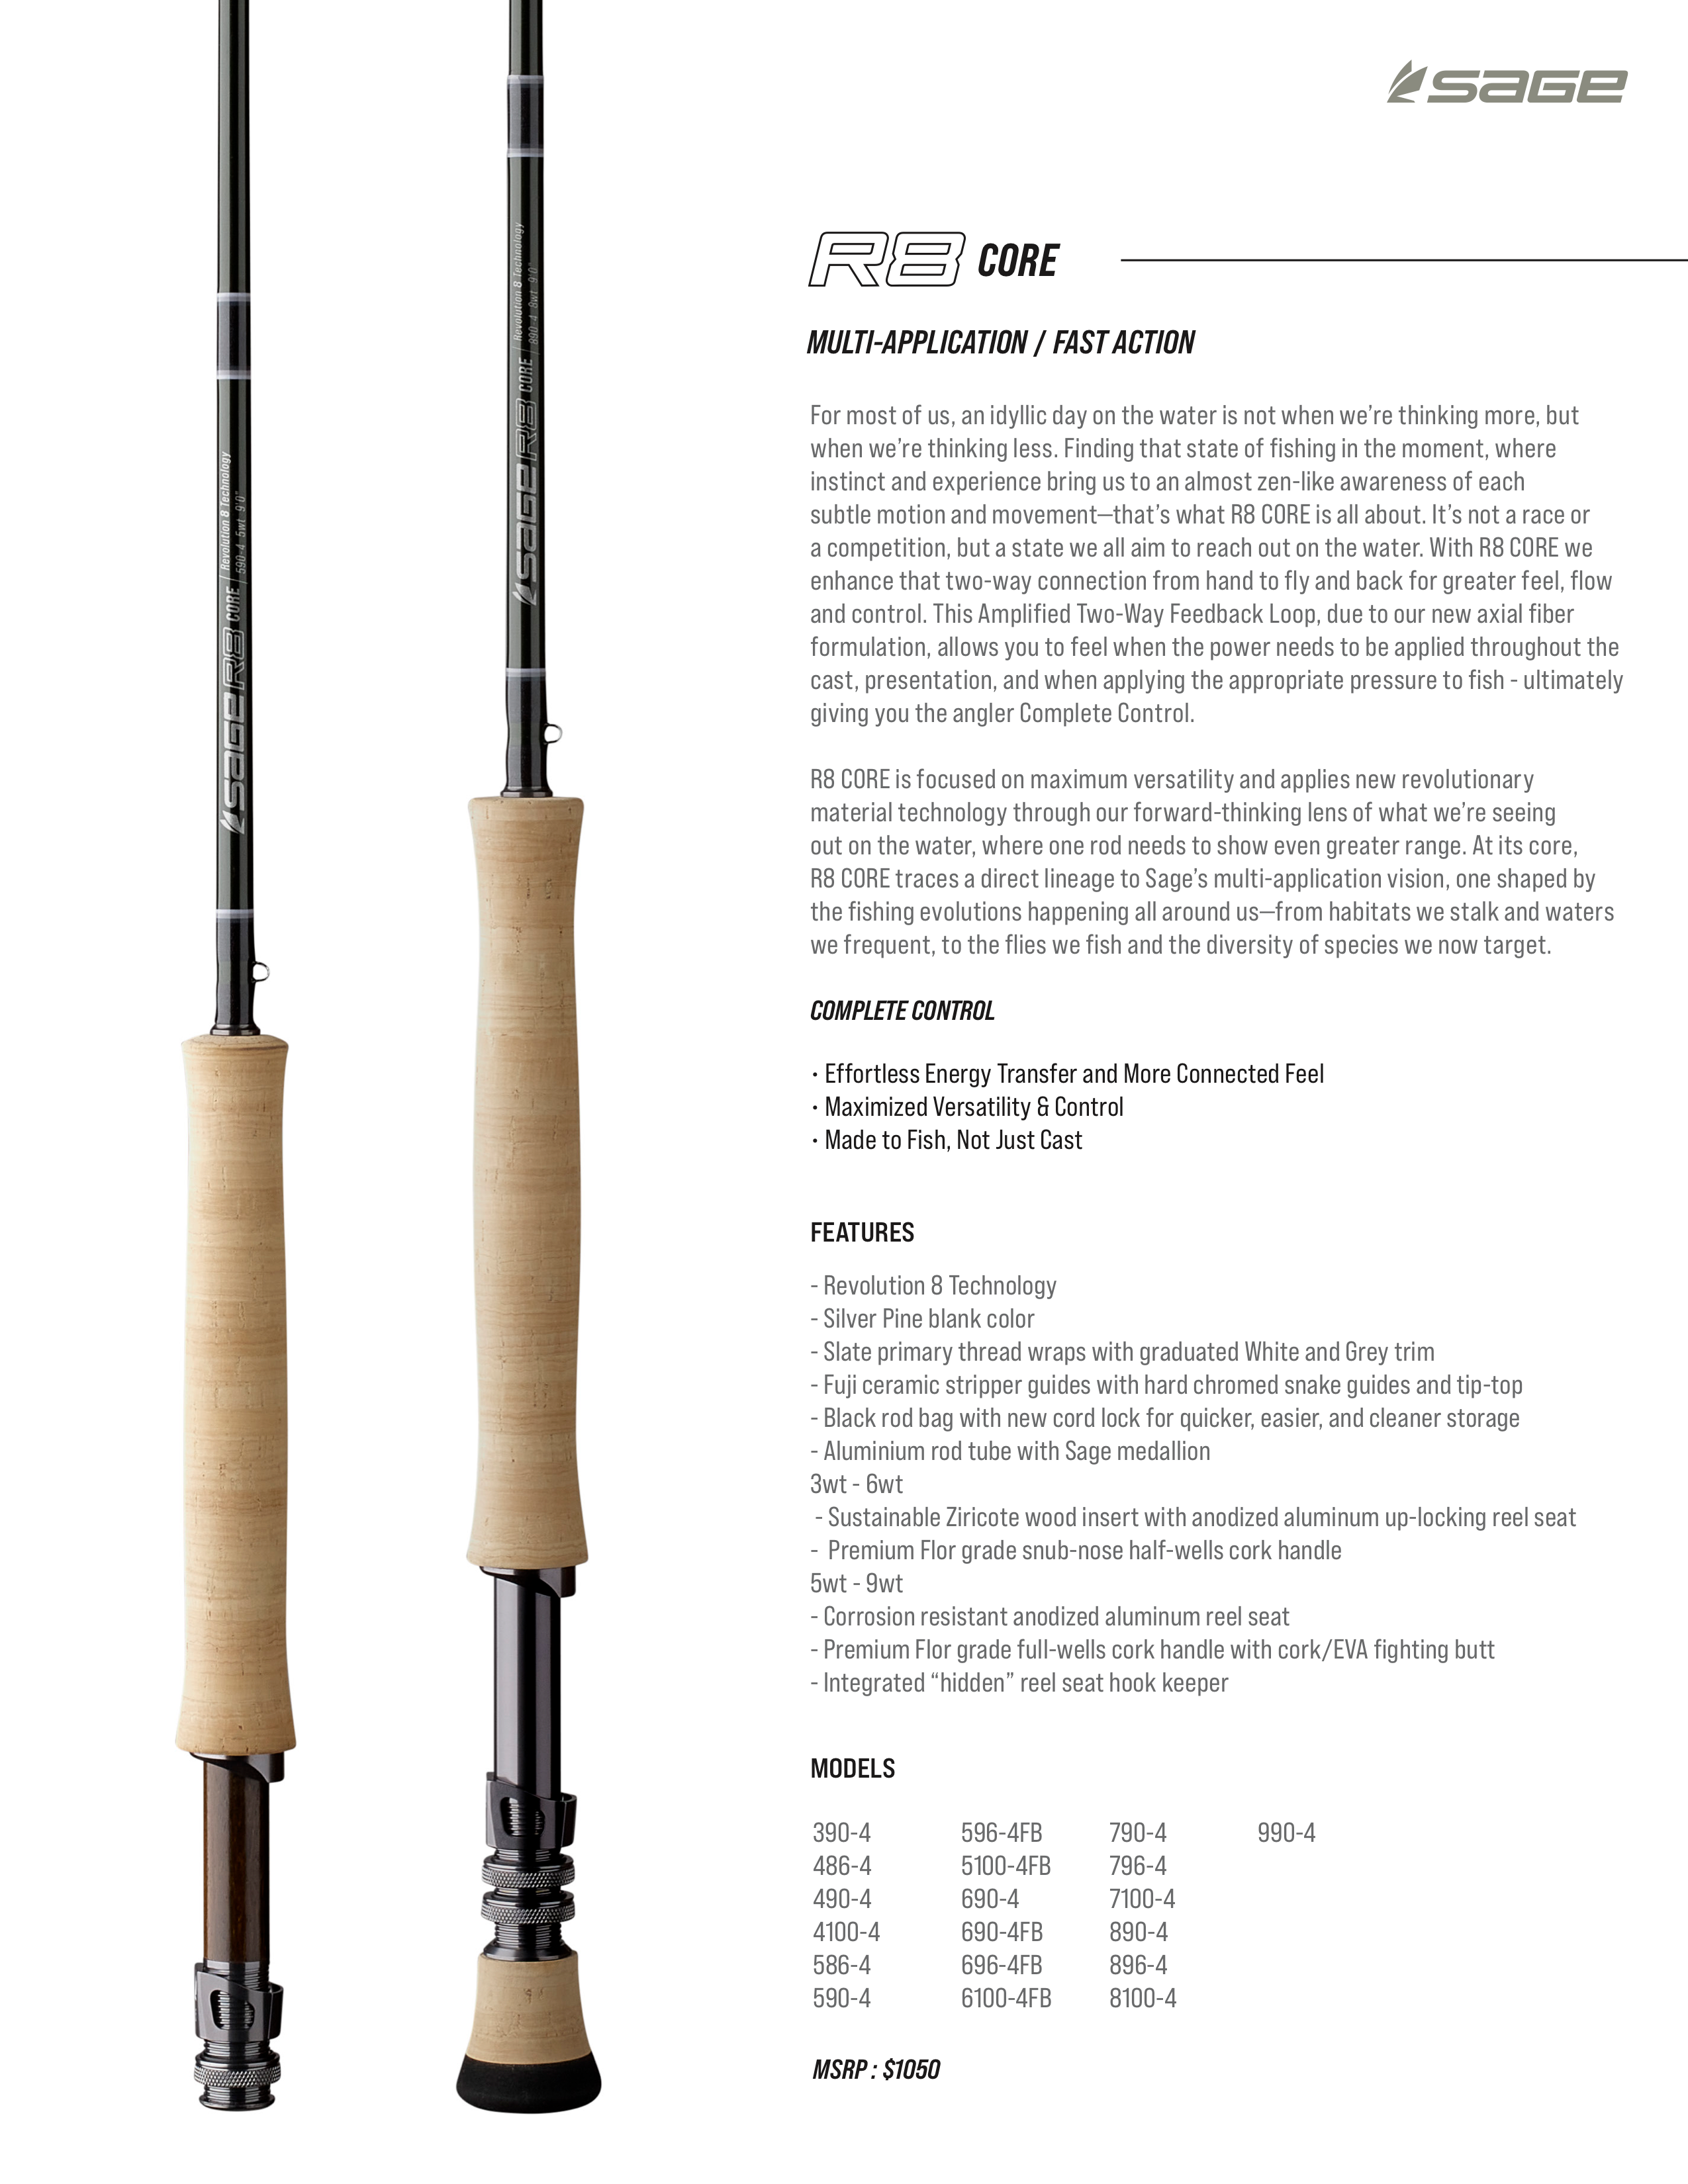 Sage R8 5wt 586-4 Fly Rods - IN STOCK!